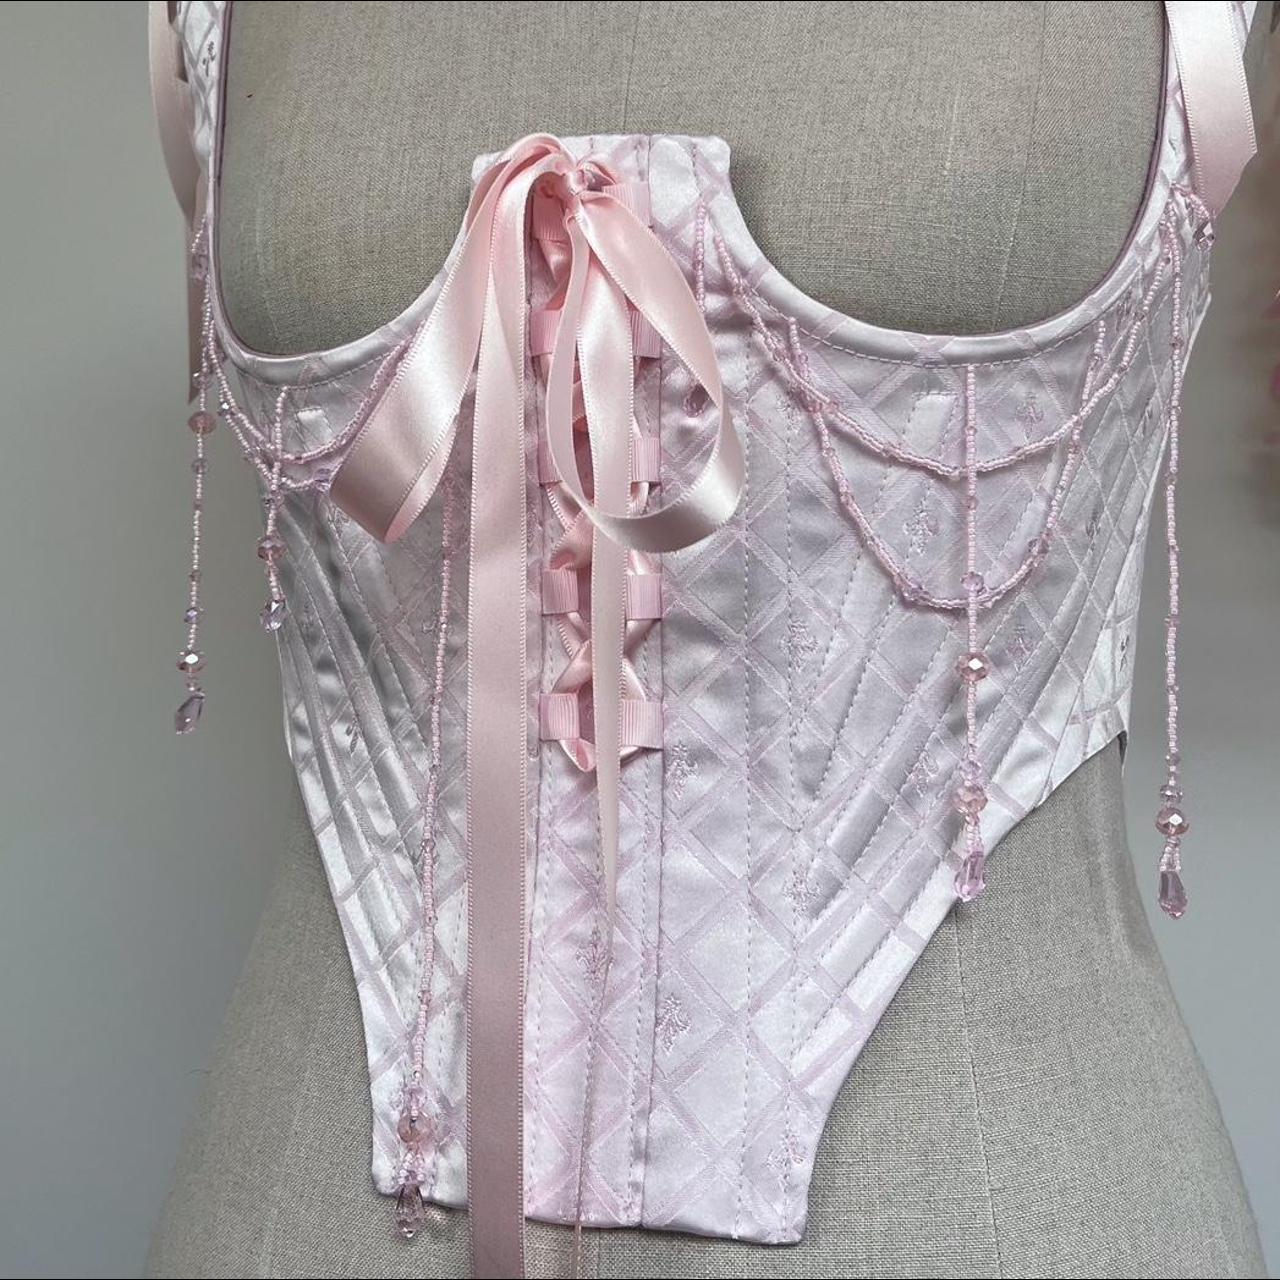 Women's Pink and White Corset | Depop